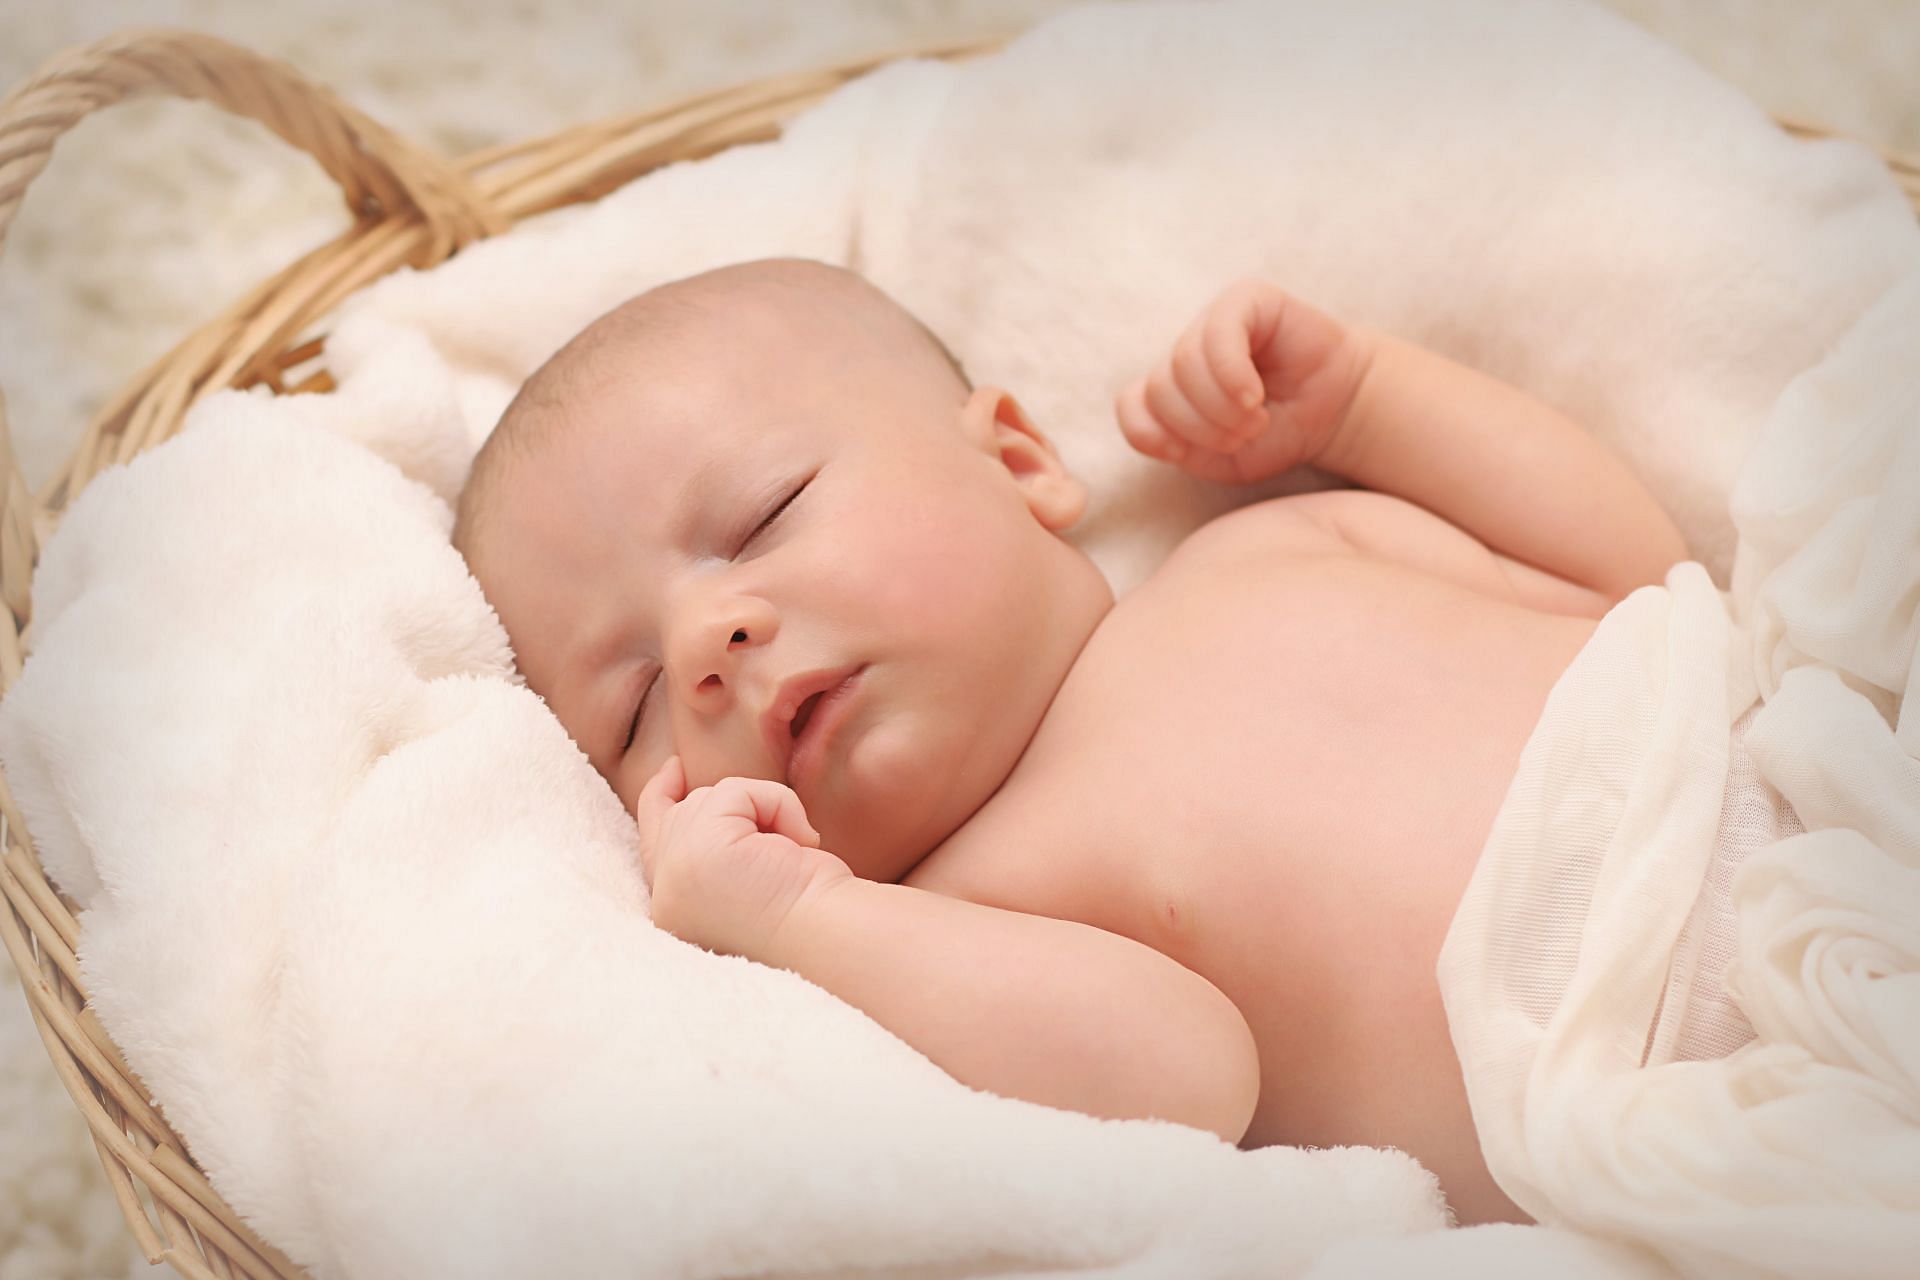 Importance of cradle cap home remedies (Image sourced via Pexels / Photo by pixabay)